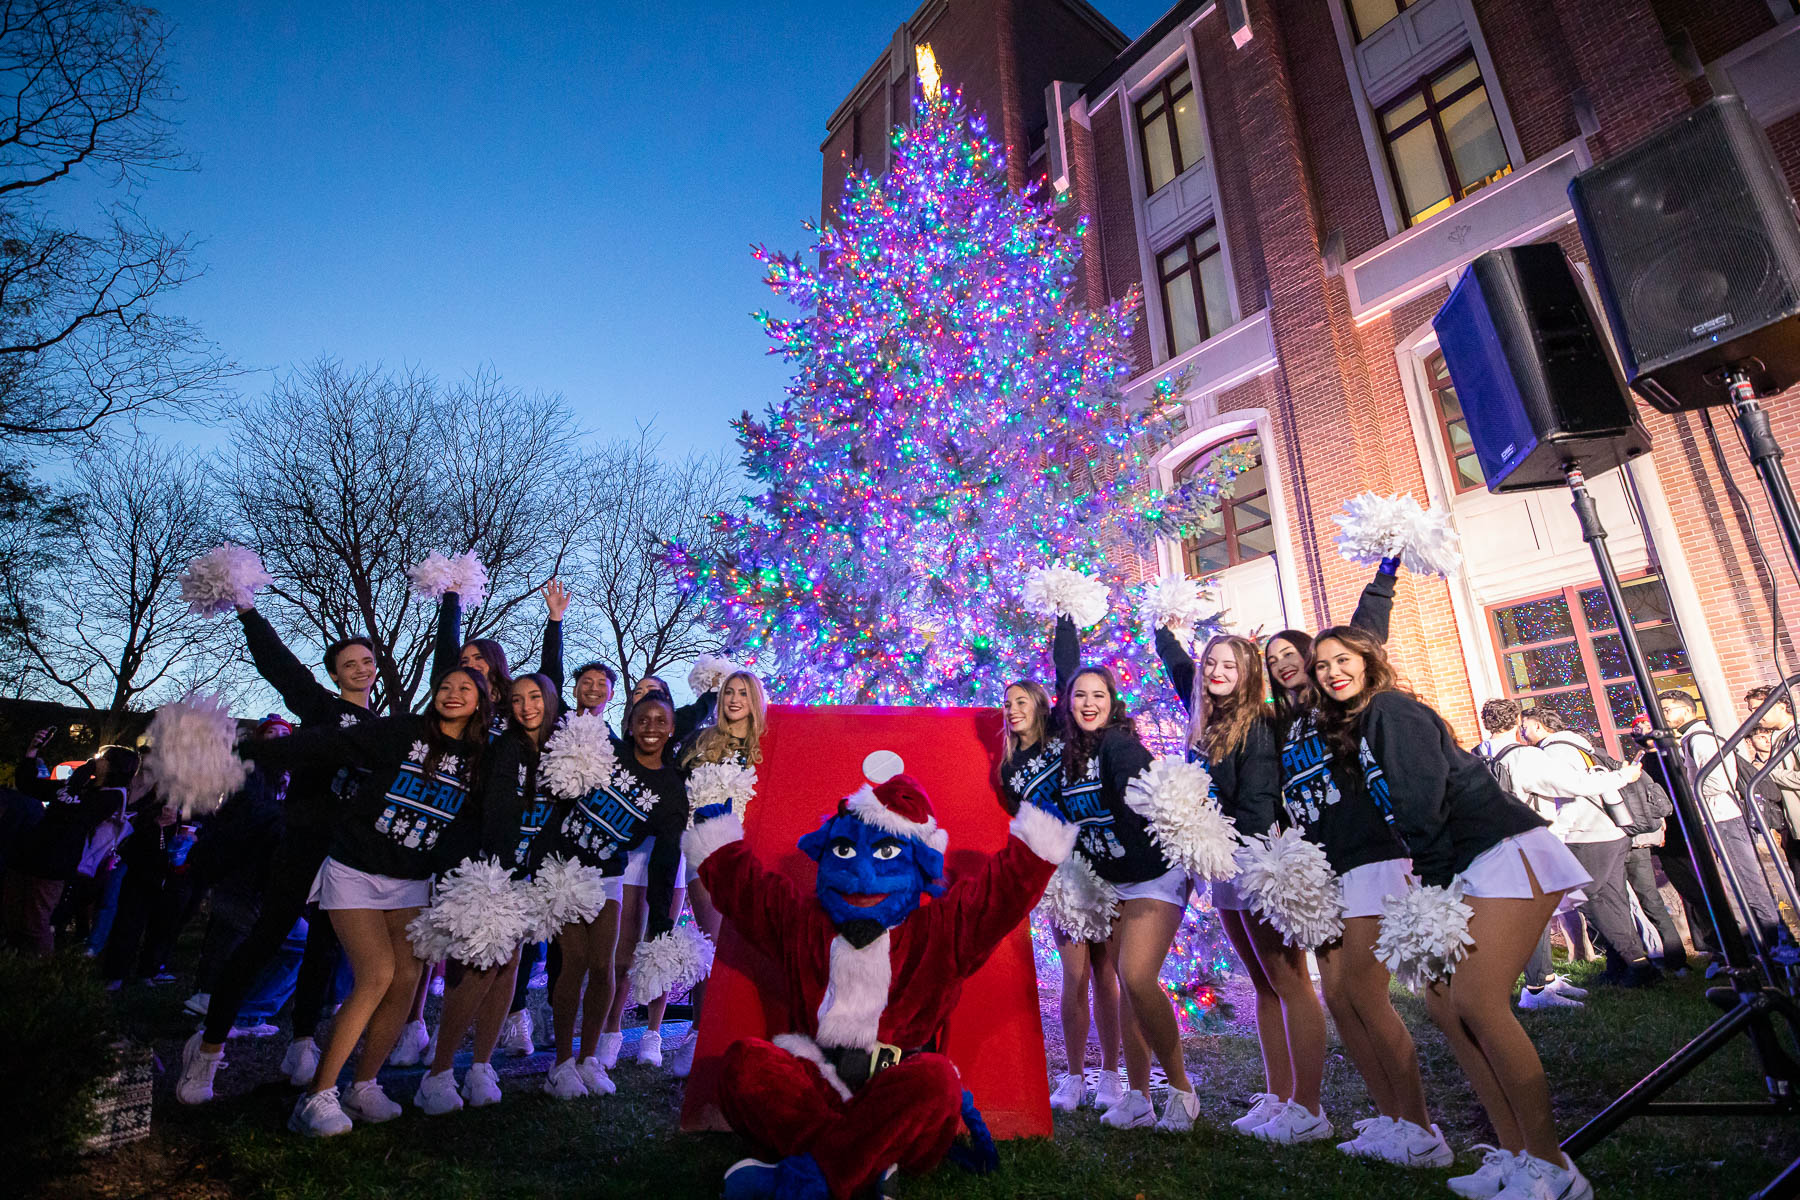 The tree will, as always, remain lit until students return to DePaul in January for the Winter Quarter. (Photo by Jeff Carrion / DePaul University) 